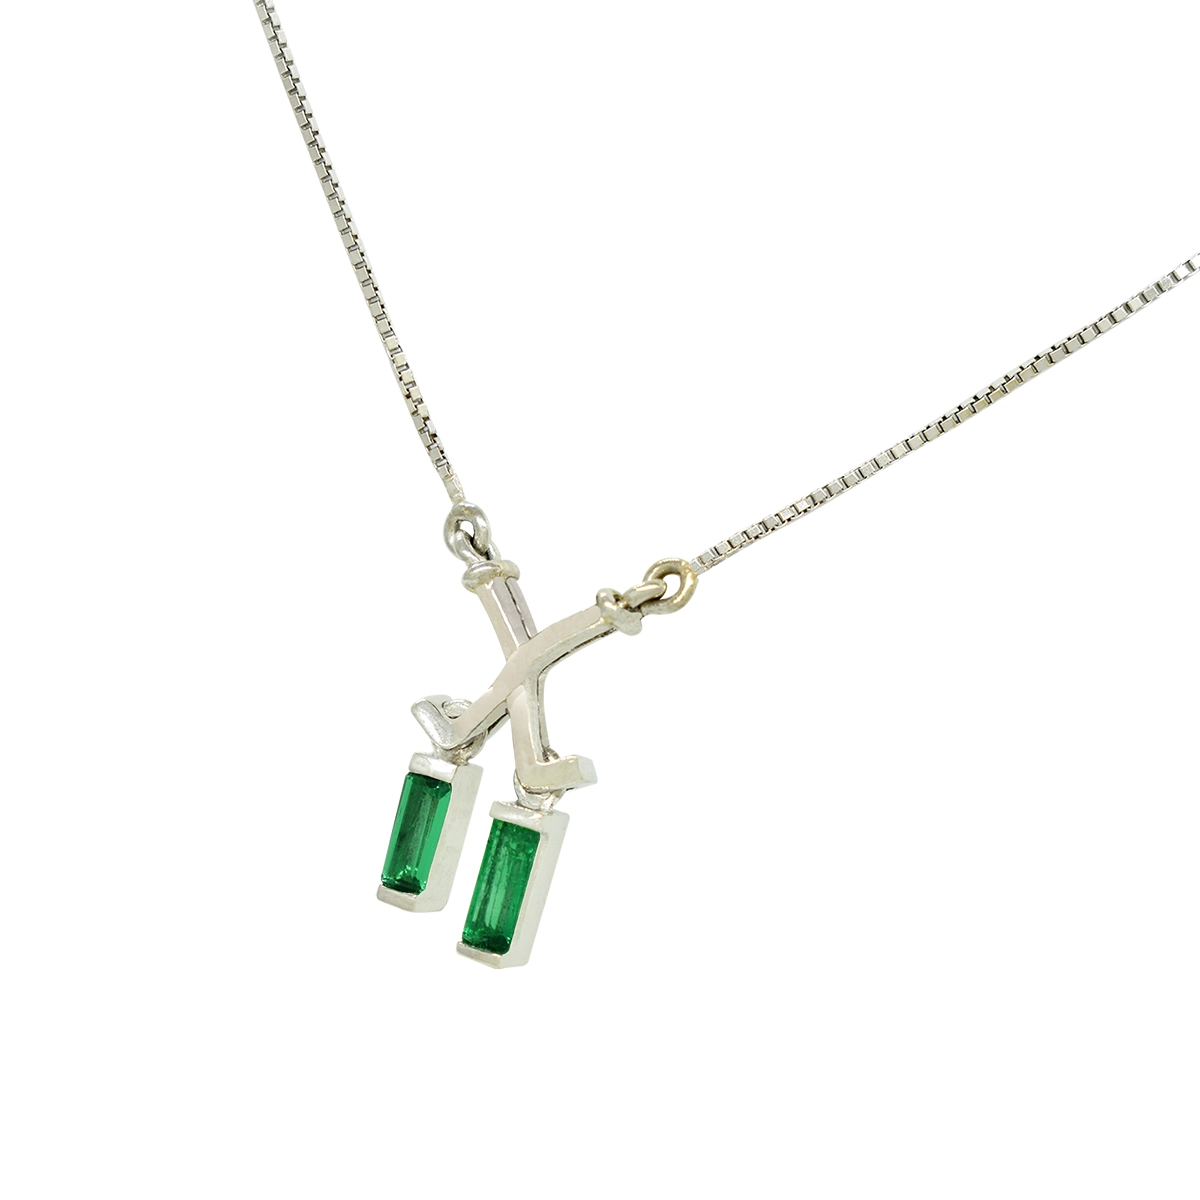 The 2 elongated shape emeralds dangle at the center part of the necklace in open bezels that allowing to see the sides of the gems